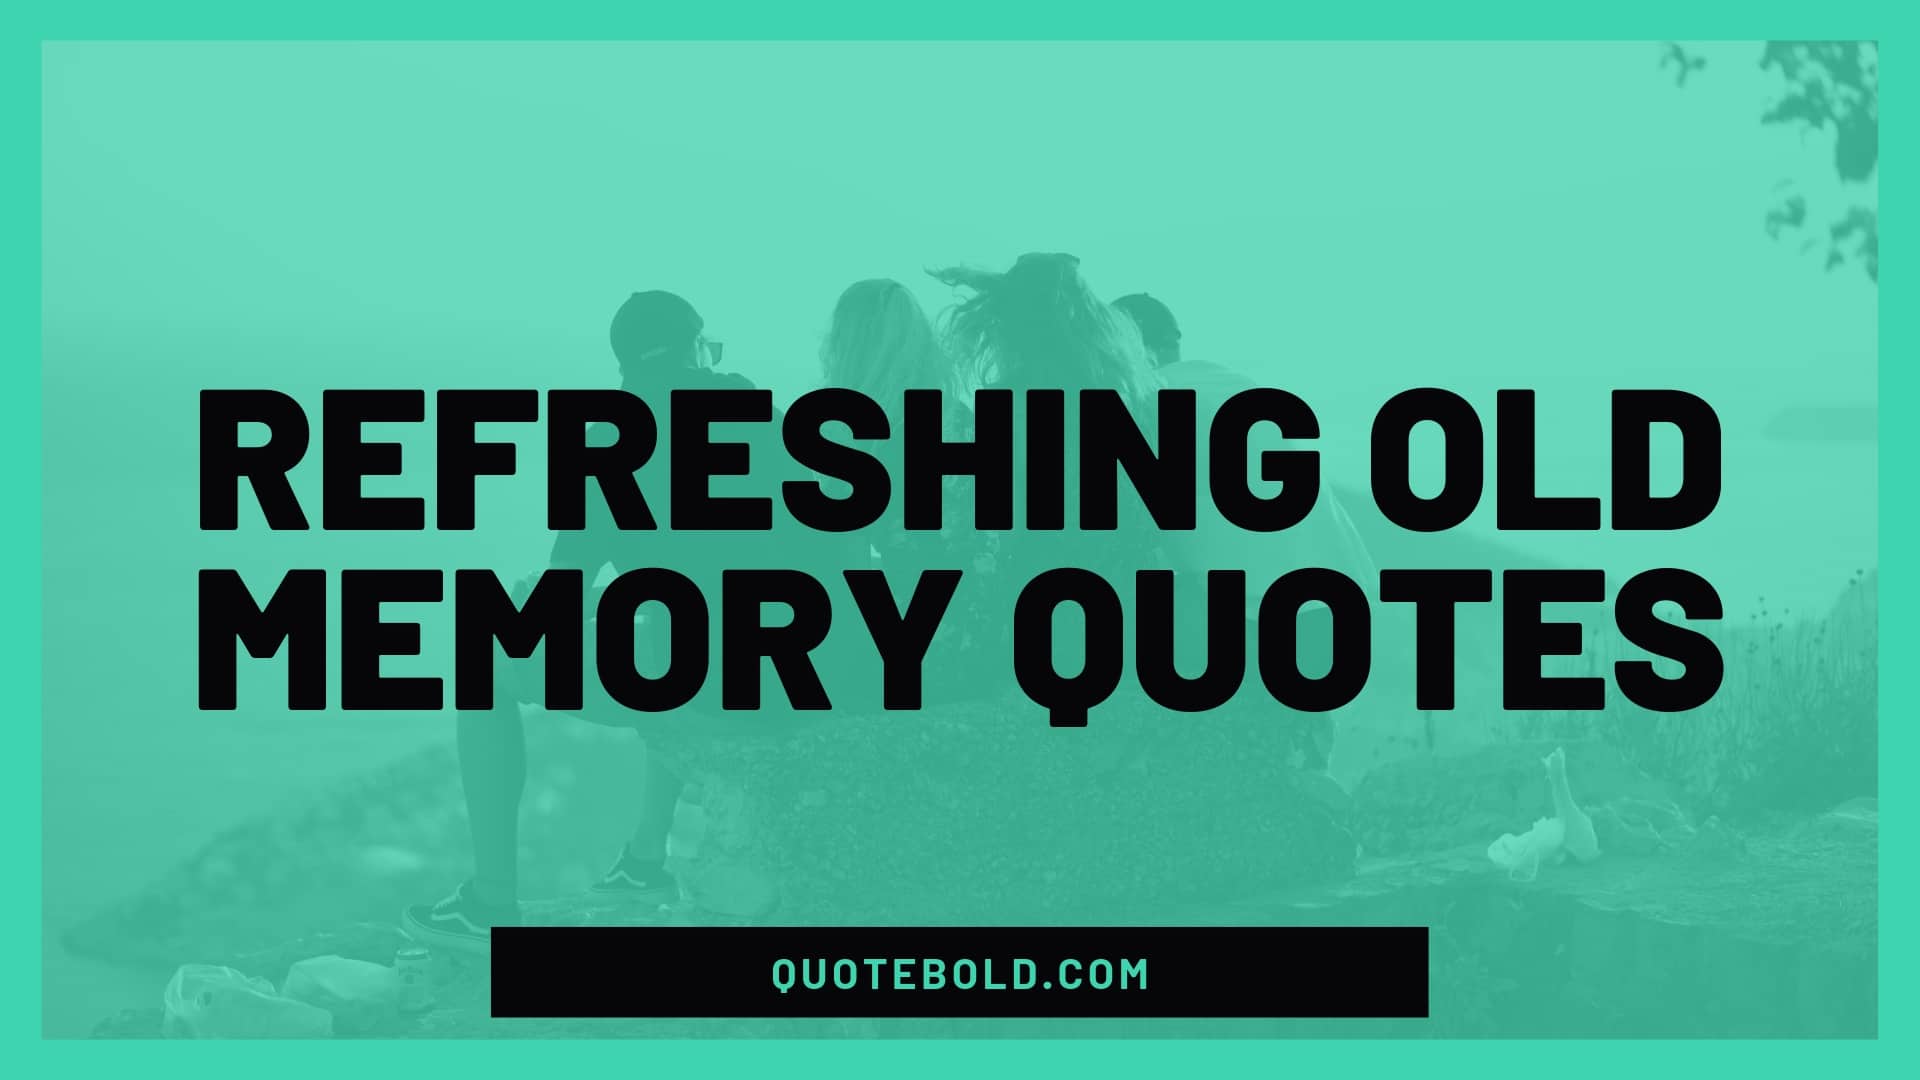 Refreshing Old Memory Quotes & Image